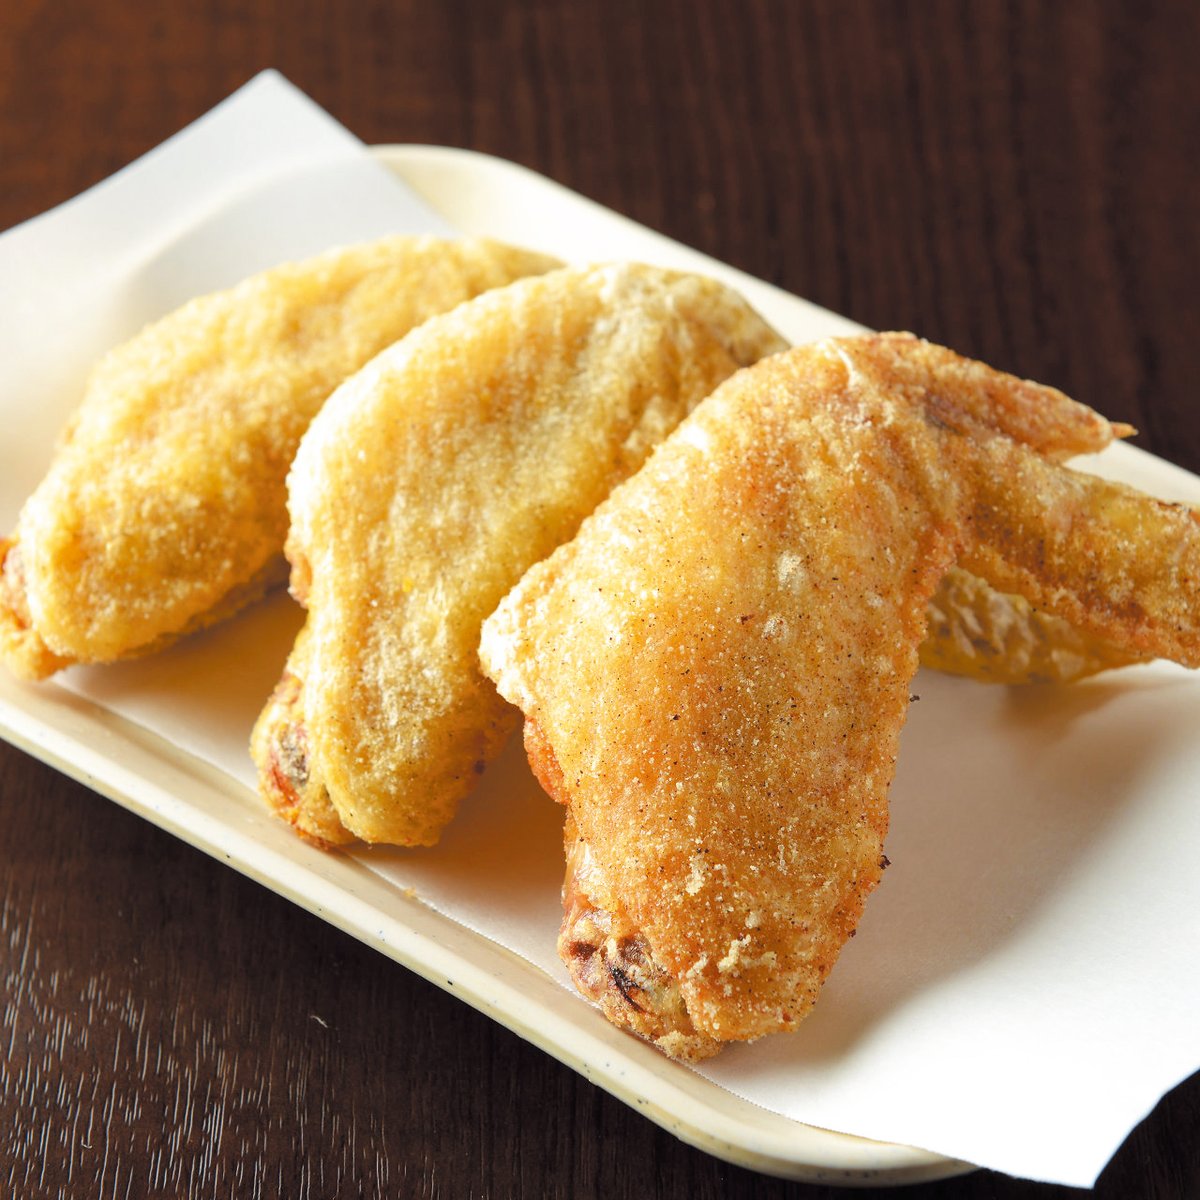 Aichi is known as Japan’s mecca for #Tebasaki, or #ChickenWings🐔 aichi-now.jp/en/spots/detai… Deep-fried, salty, and savory, the varieties are endless and all come together at the Tebasaki Summit in #Nagoya, 5/31–6/2! Come and get your eat on!😋 #AichiNow